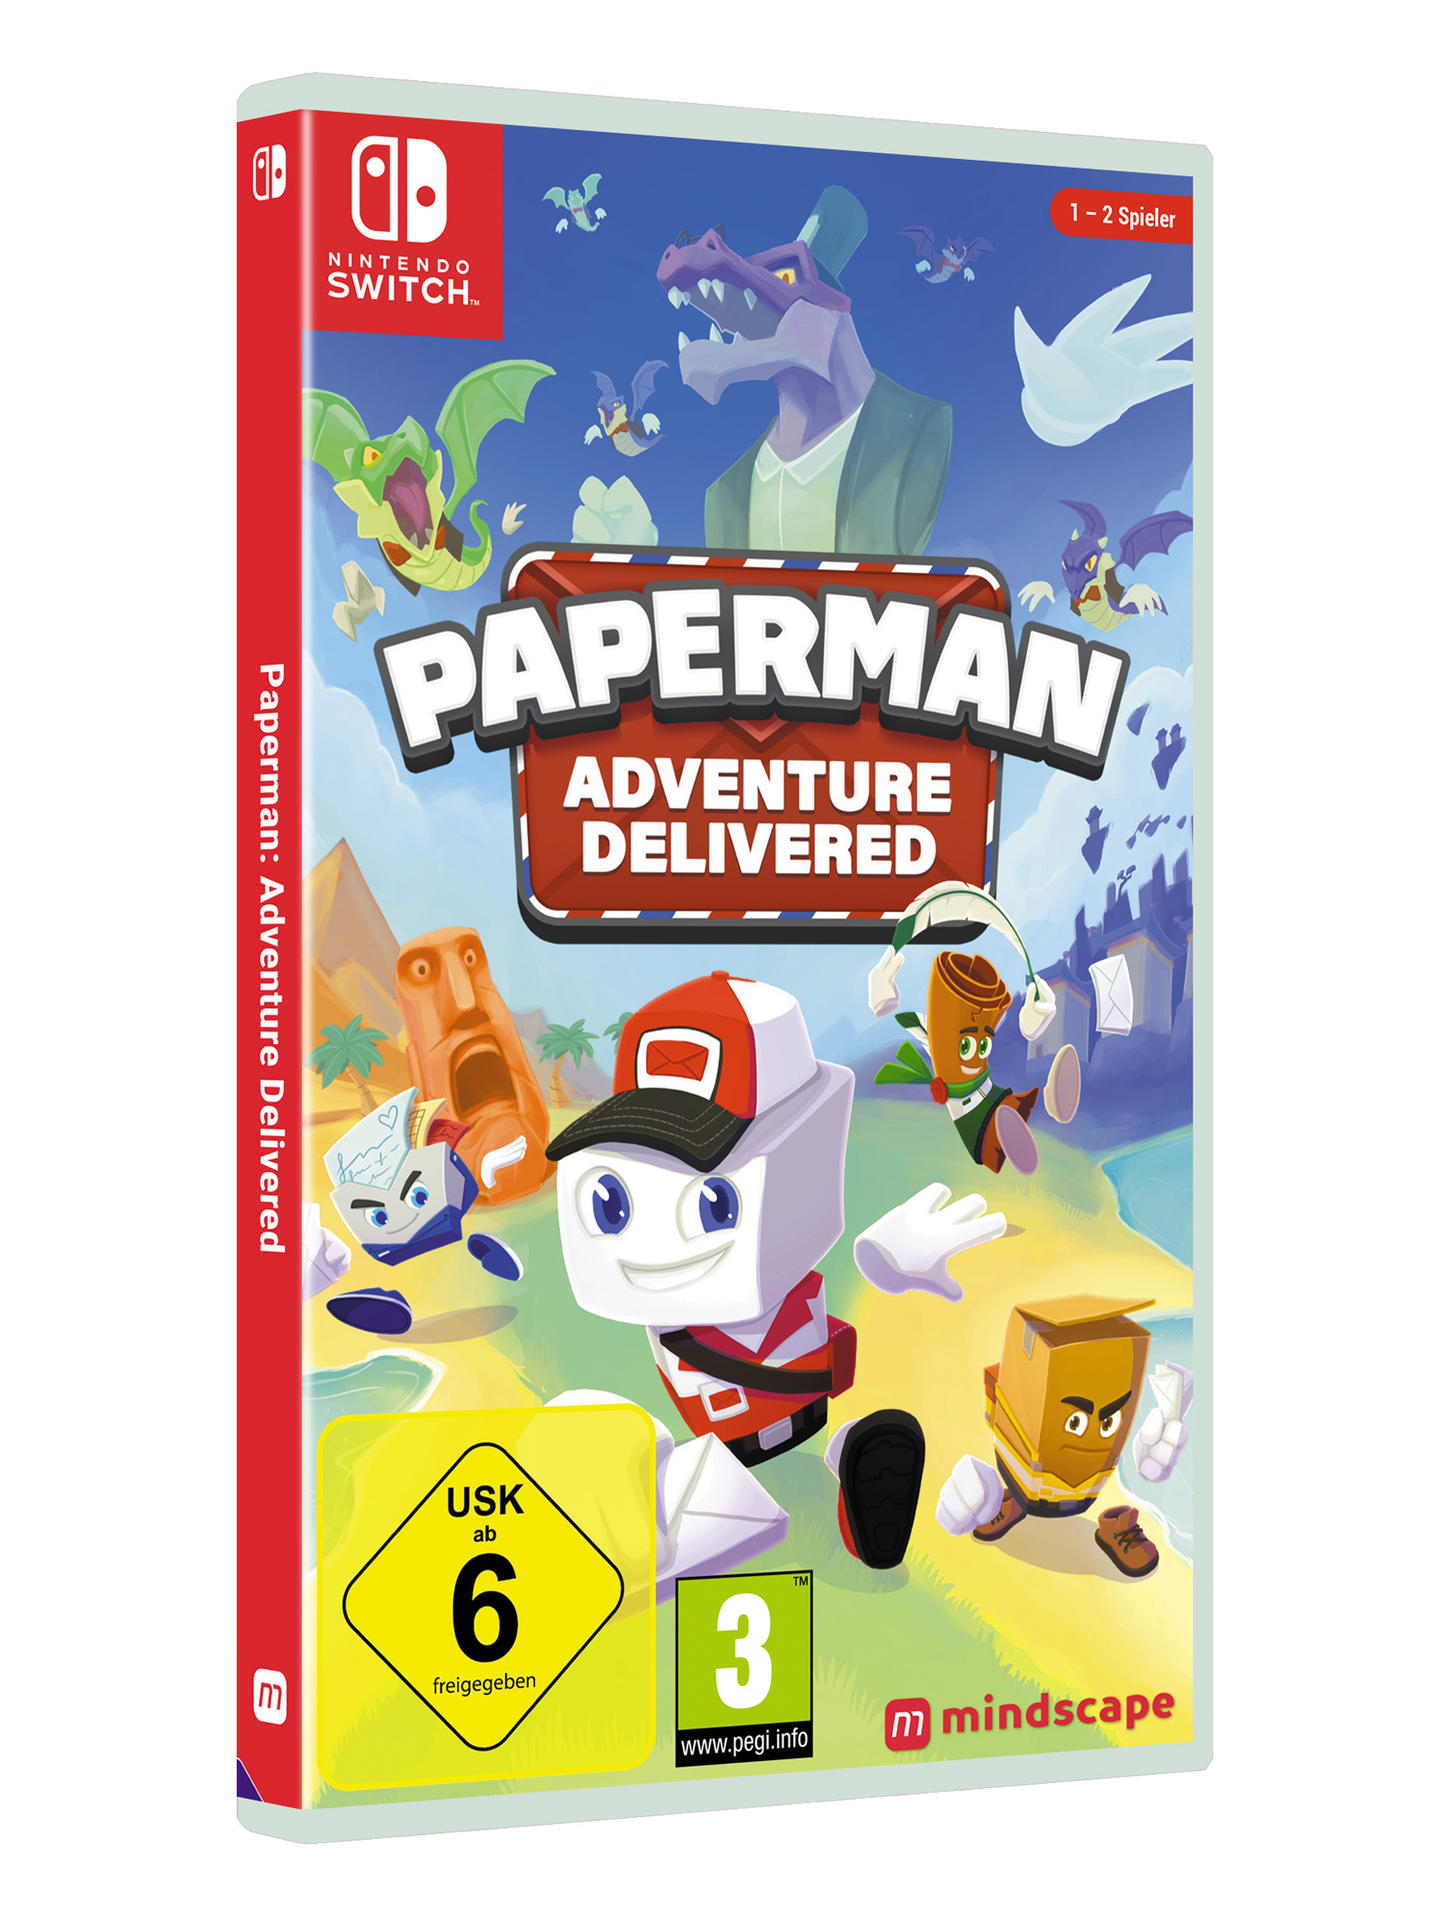 Paperman: Switch] Adventure [Nintendo Delivered -